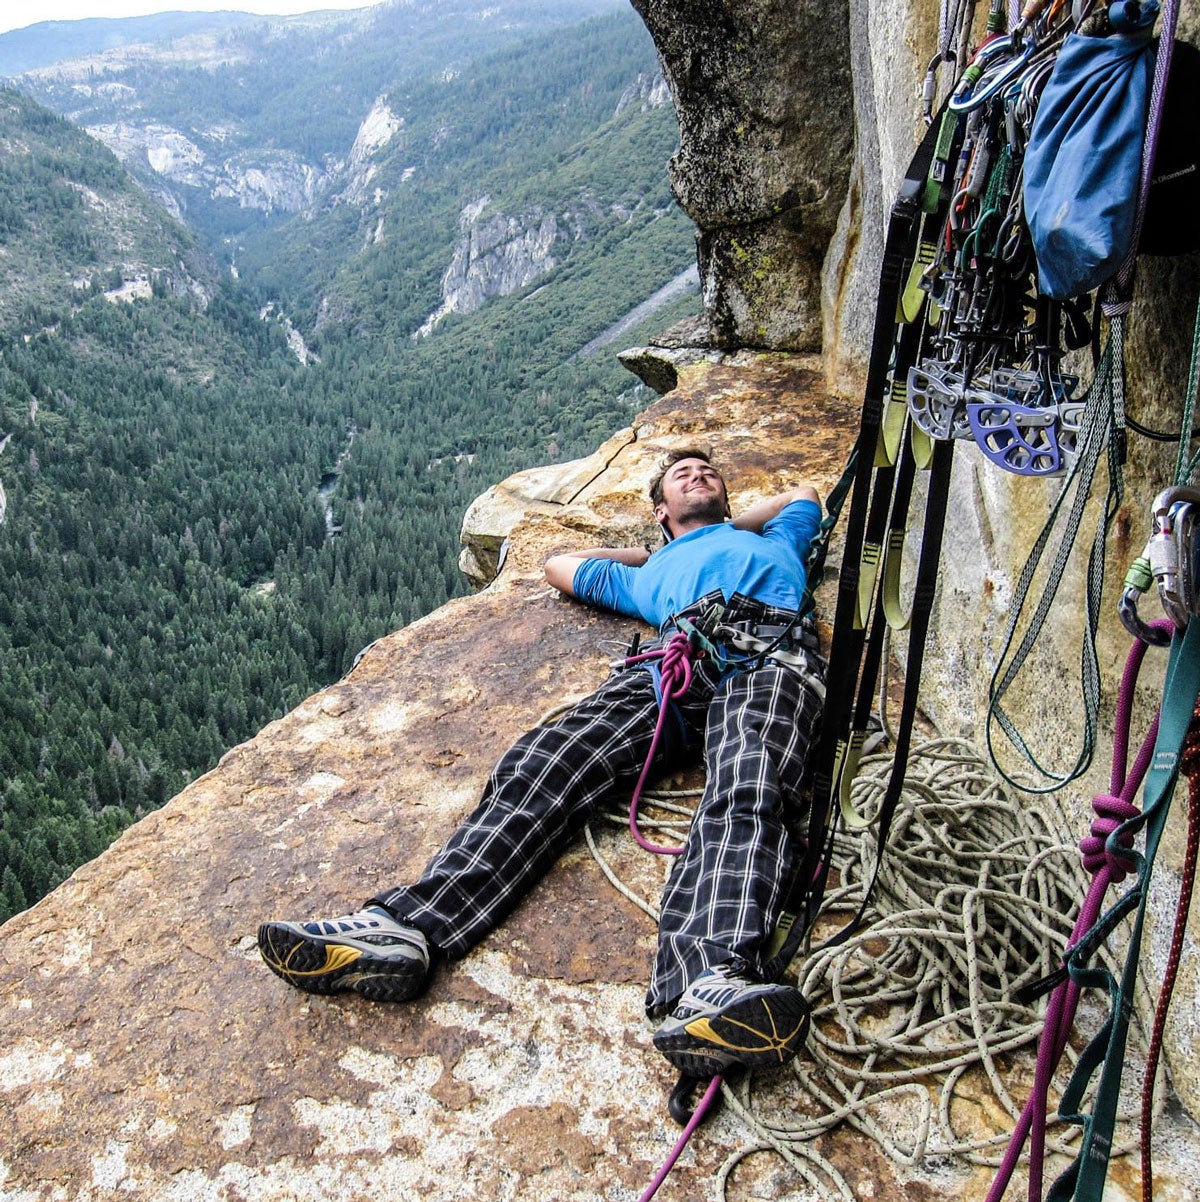 Dane Larson relaxes with his climbing gear on a rock shelf on the side of a mountain, a valley sprawling out behind him.